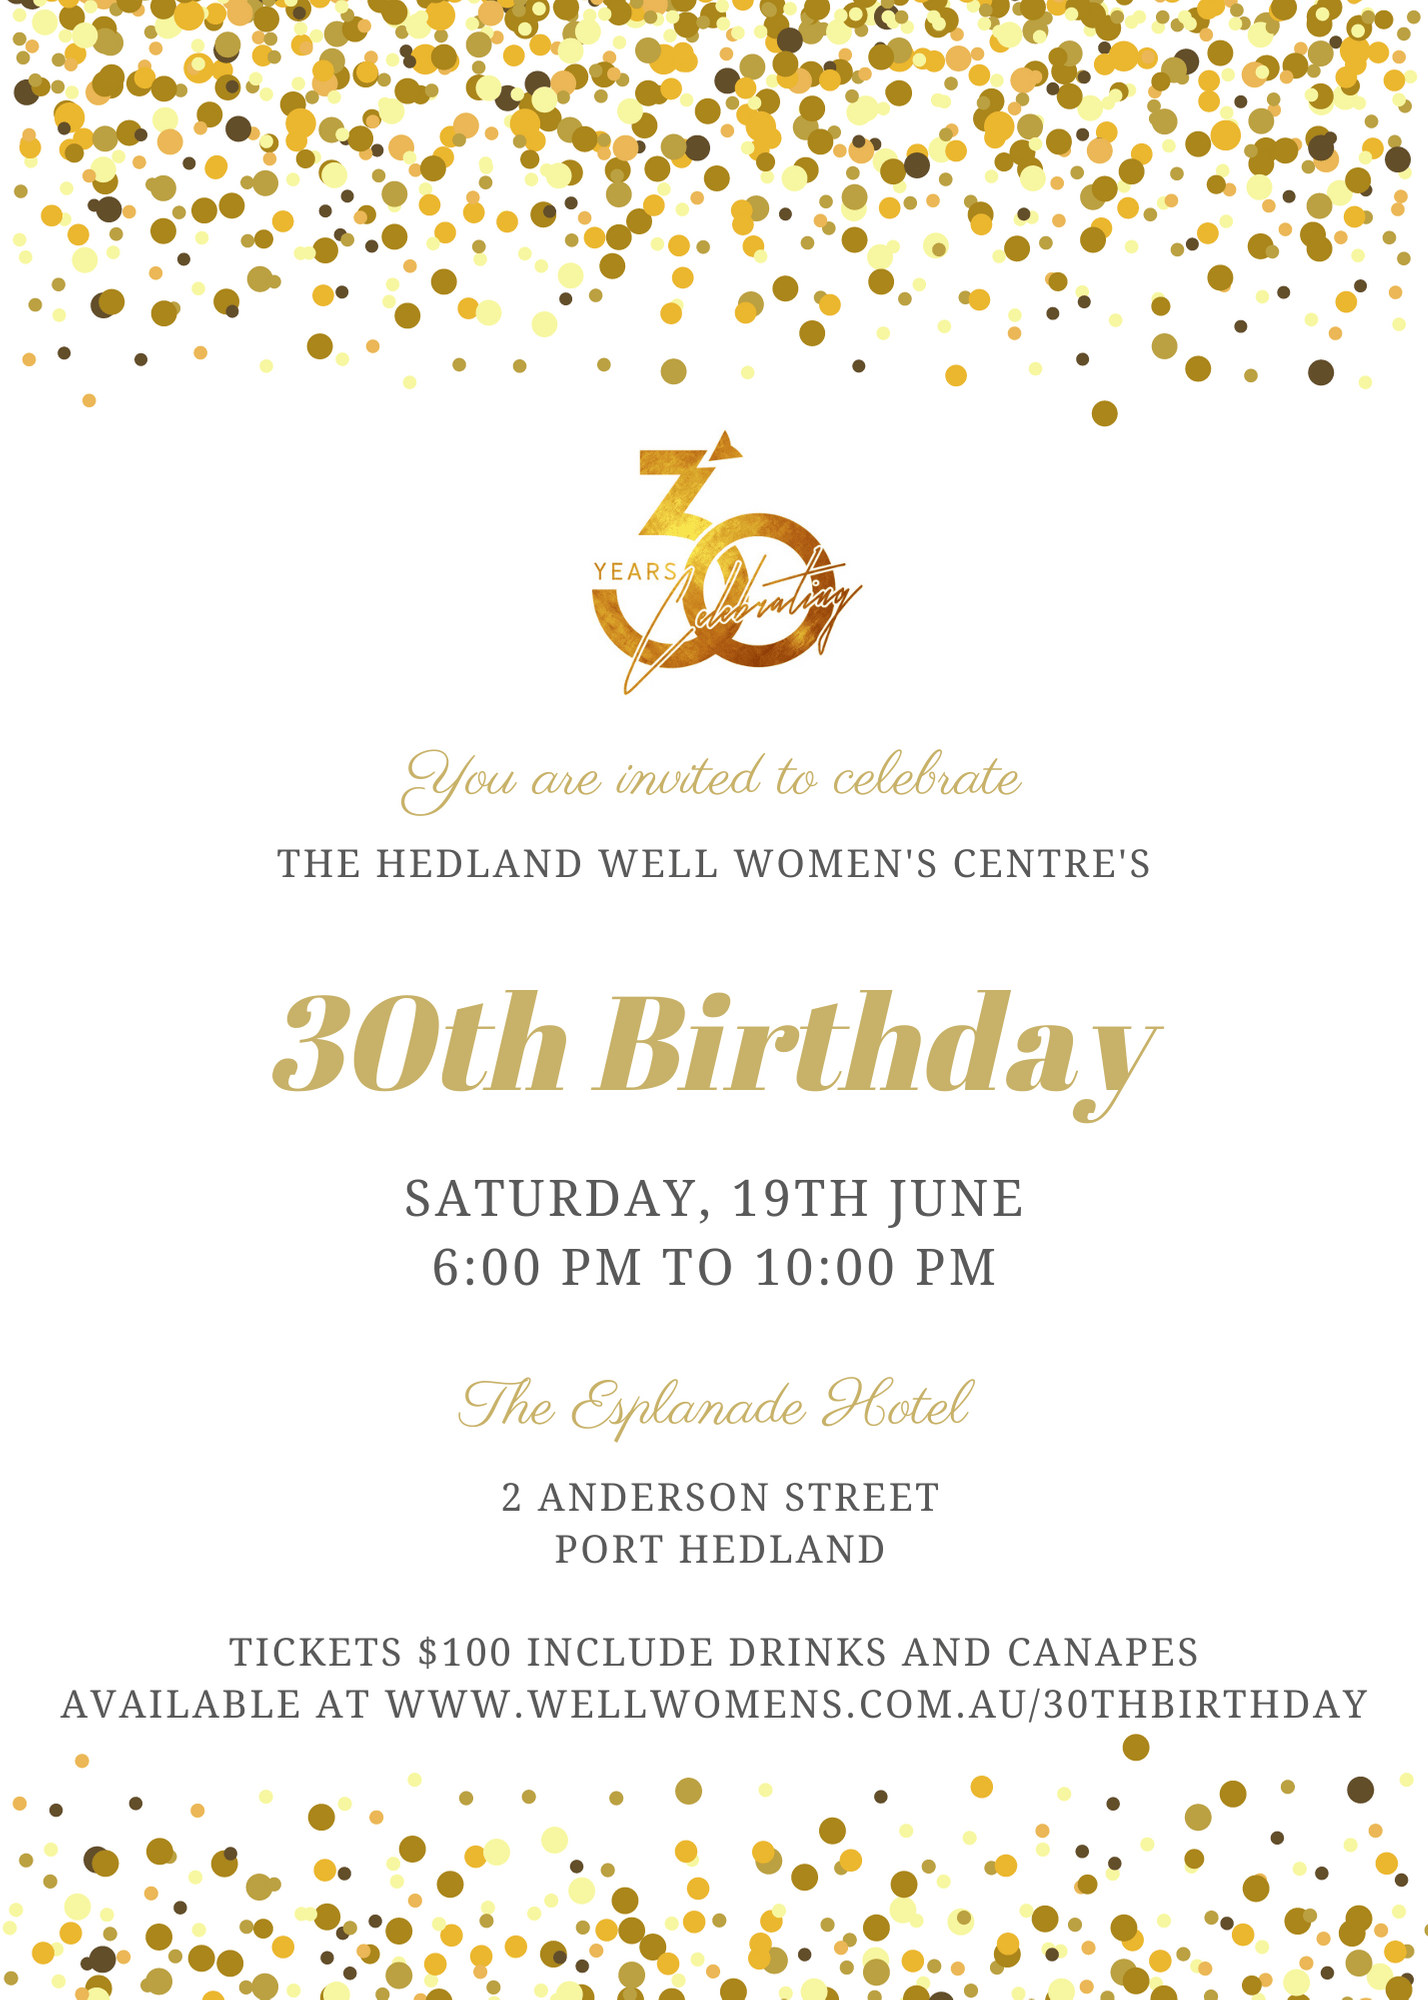 30th Birthday Event - Hedland Well Women's Centre